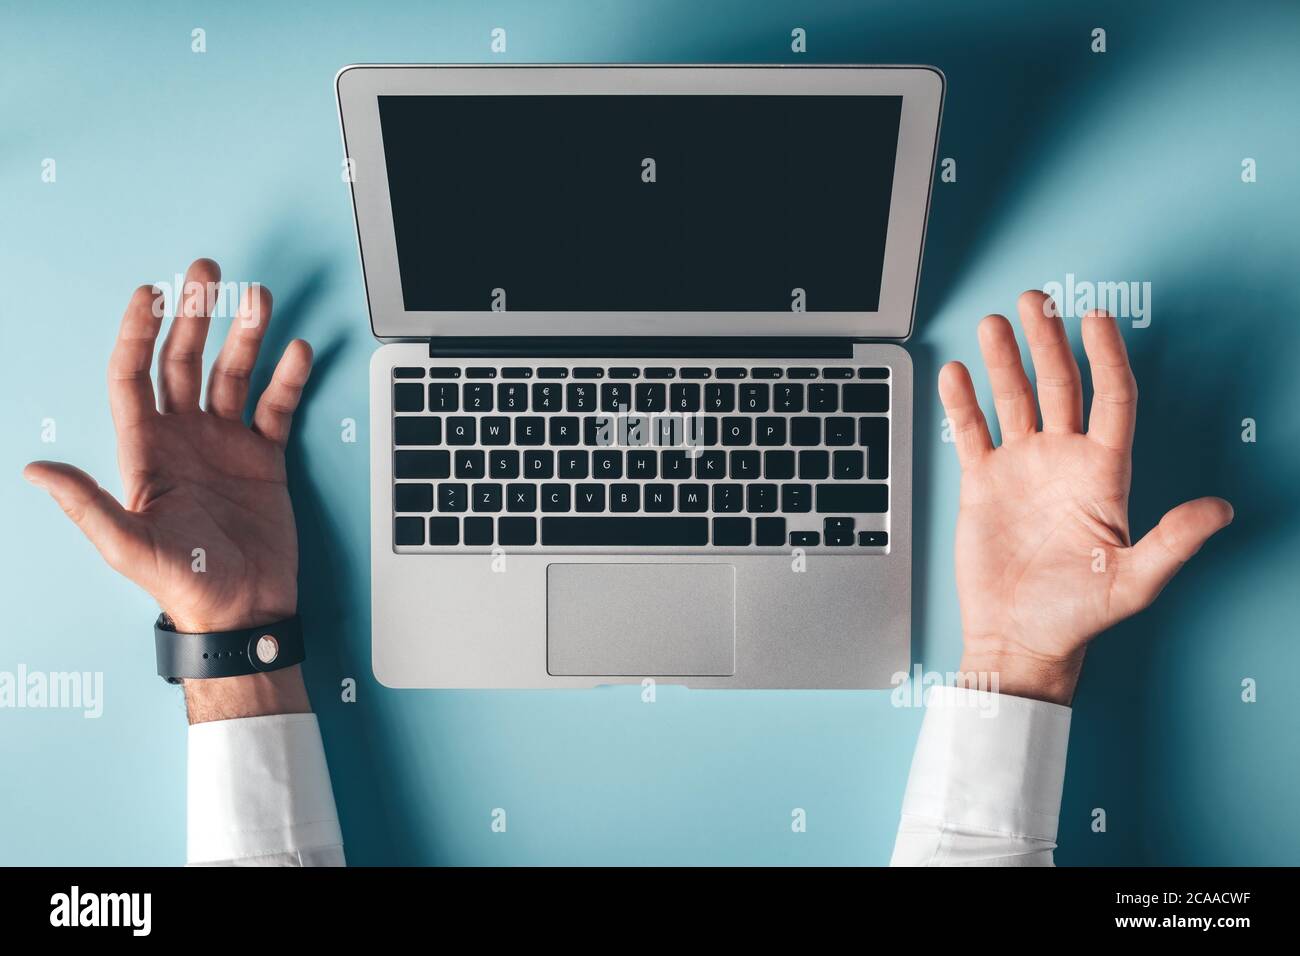 Frustrated laptop computer user, top view mock up copy space. Hands spread in disbelief and frustration. Stock Photo